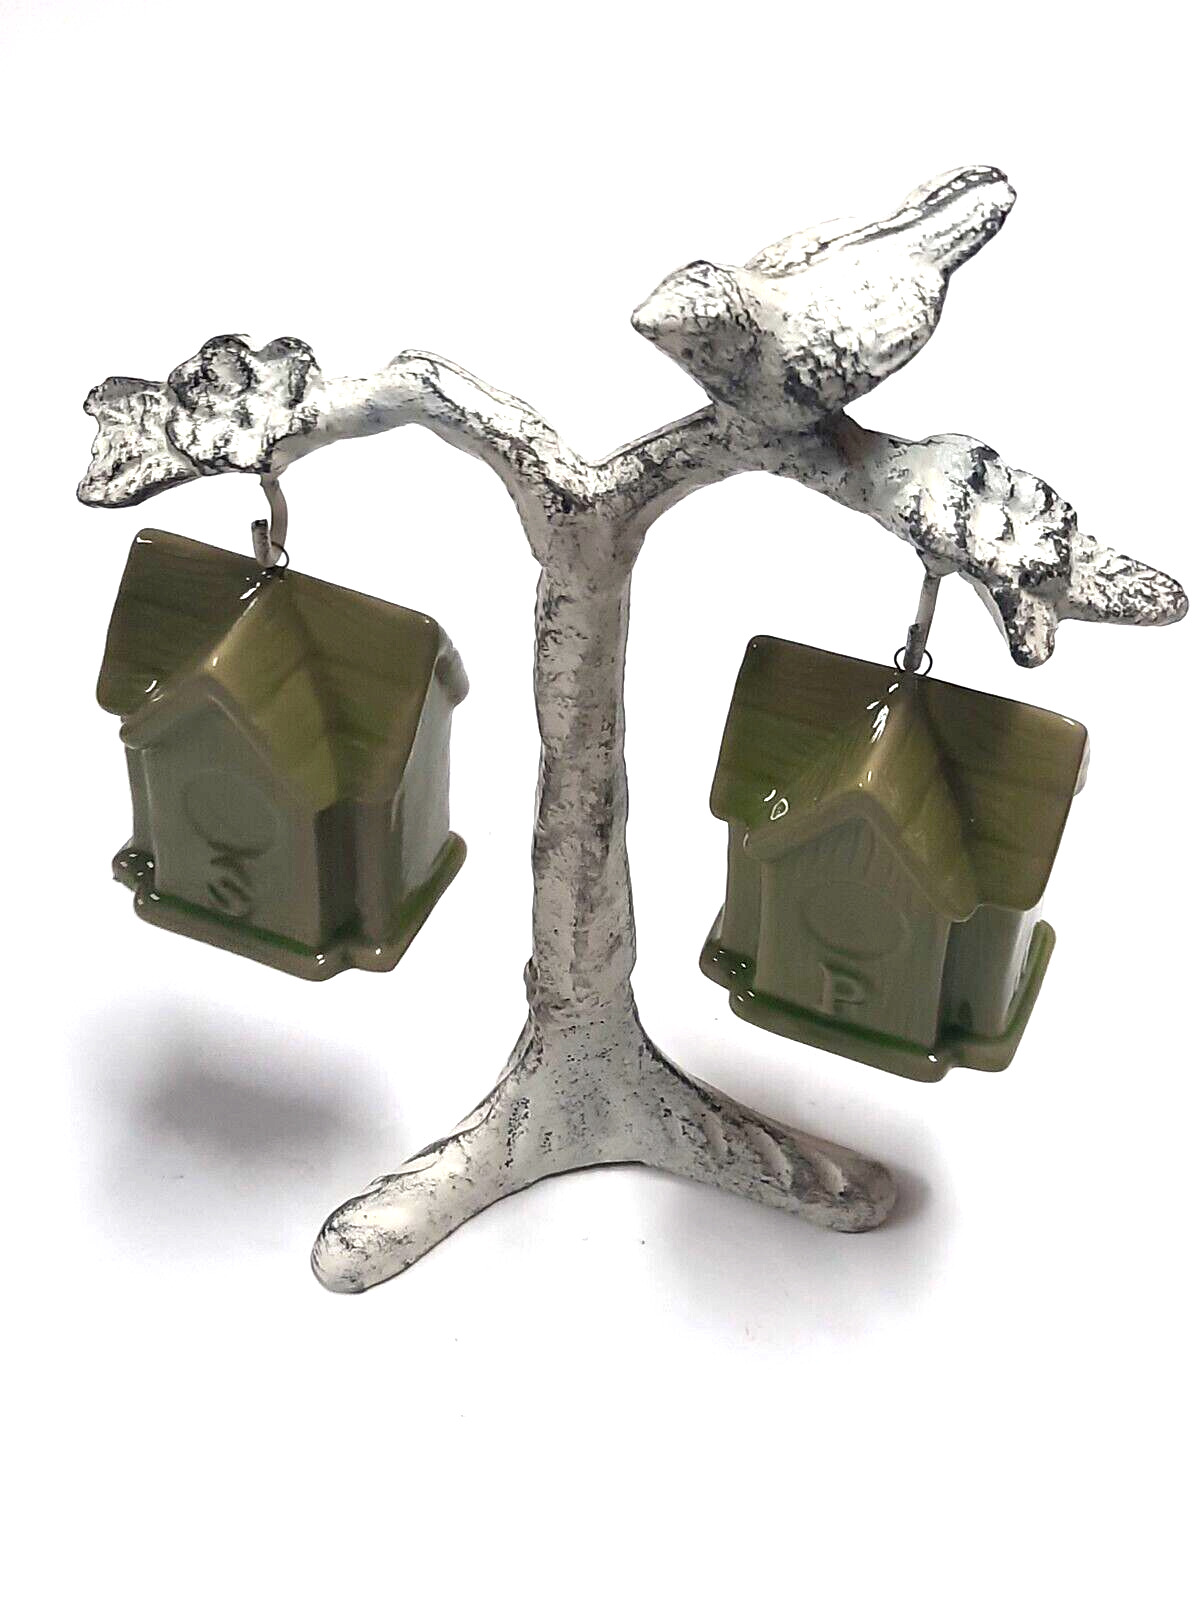 Metal tree with bird and ceramic bird houses salt and pepper shakers